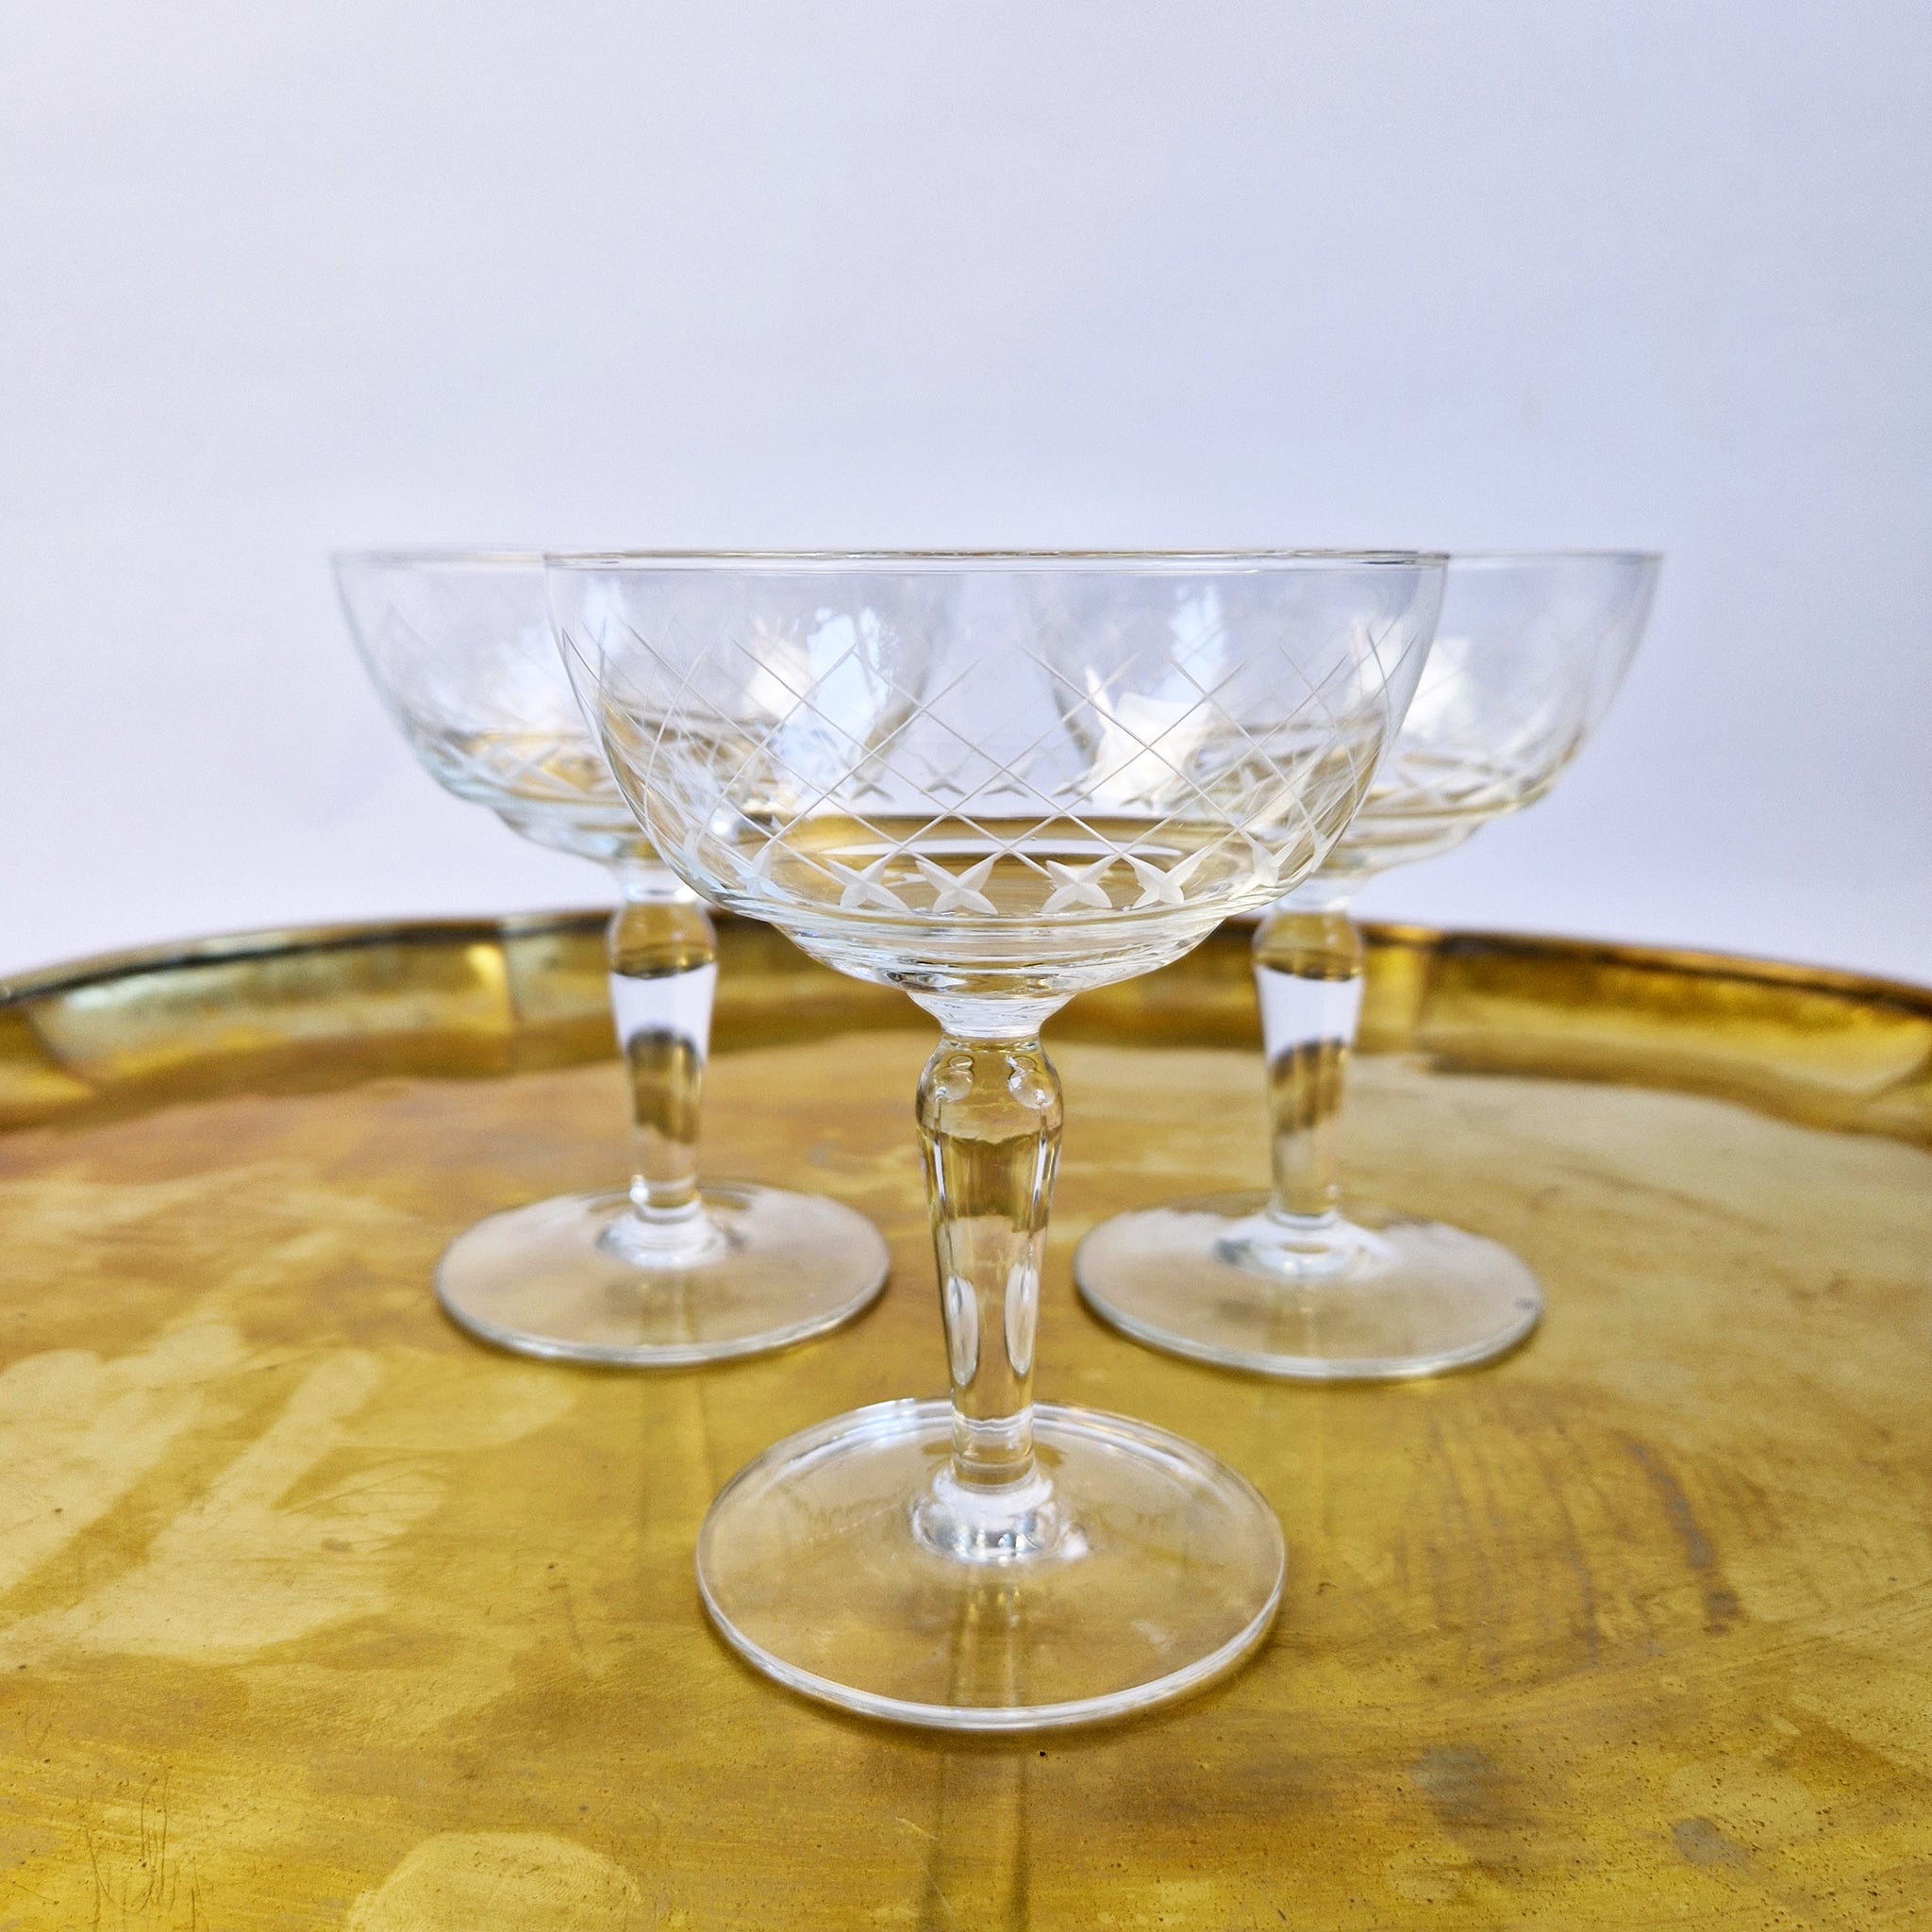 Mid-century champagne glasses (two sets of 4 available)